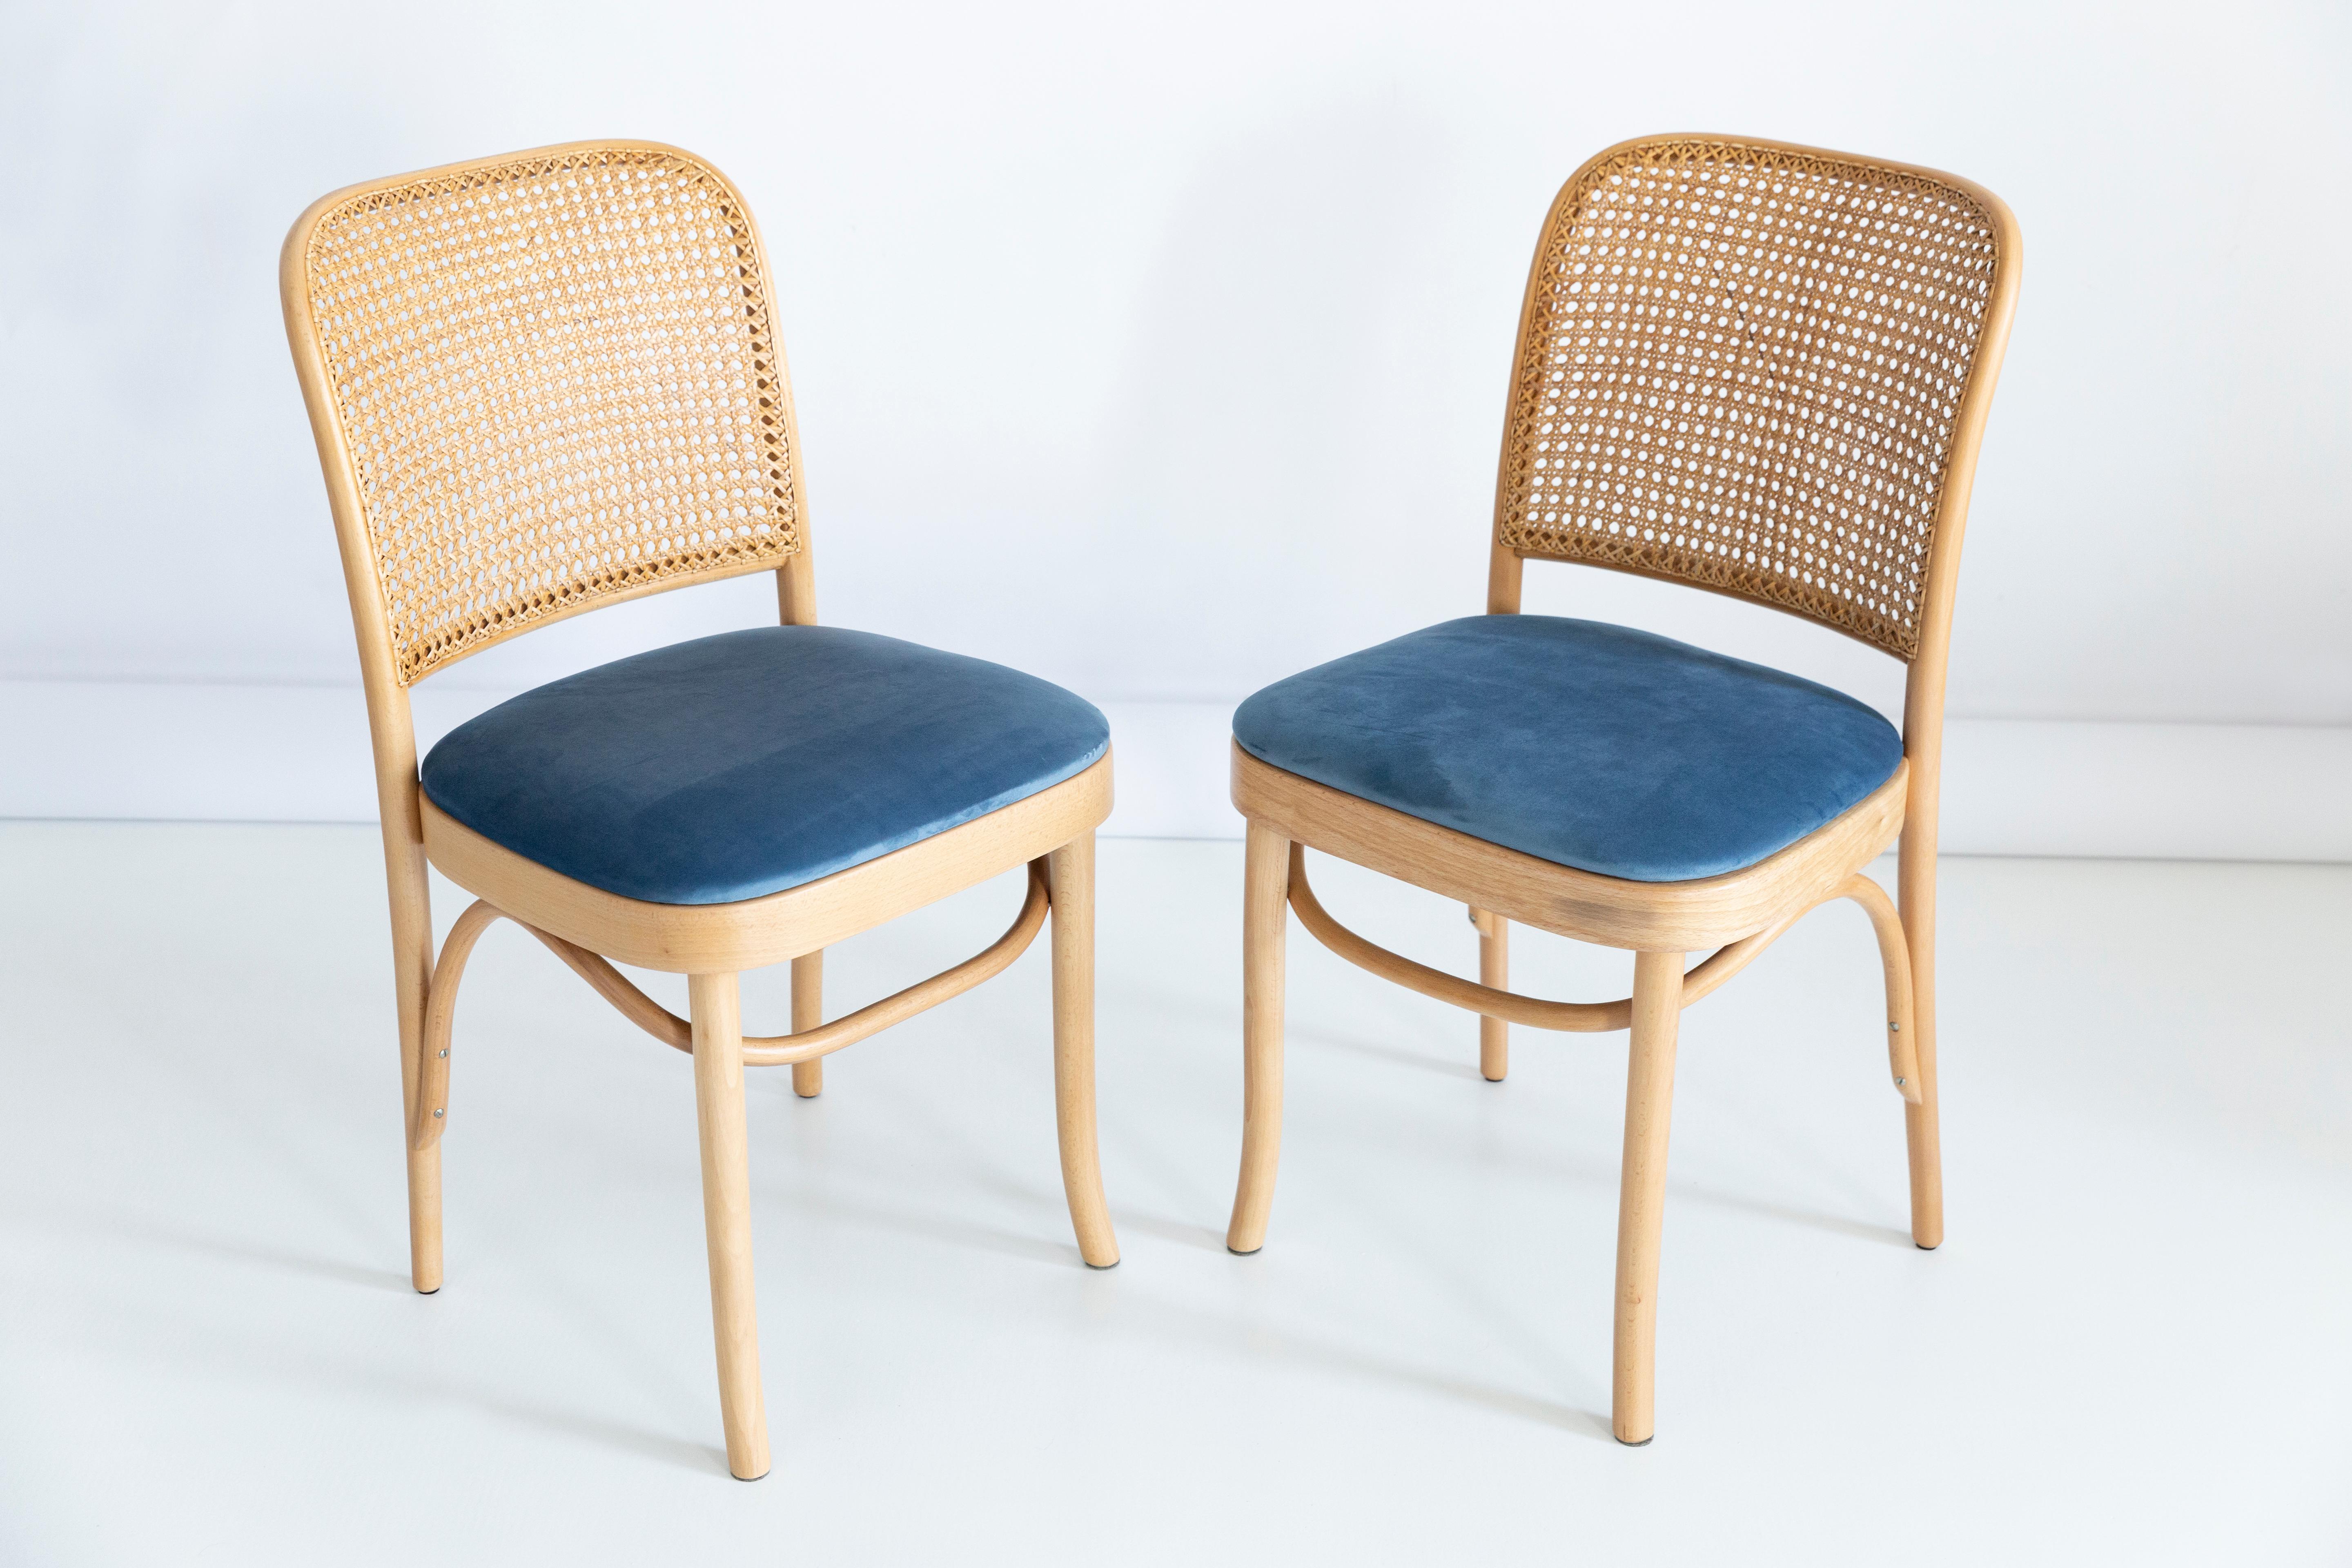 A set of 2 rattan and wood chairs. The furniture was designed by Helena and Jerzy Kurmanowicz. They were produced in Thonet woodworking factory and we thoroughly renovated them. The construction is made of beechwood dyed with water stain light